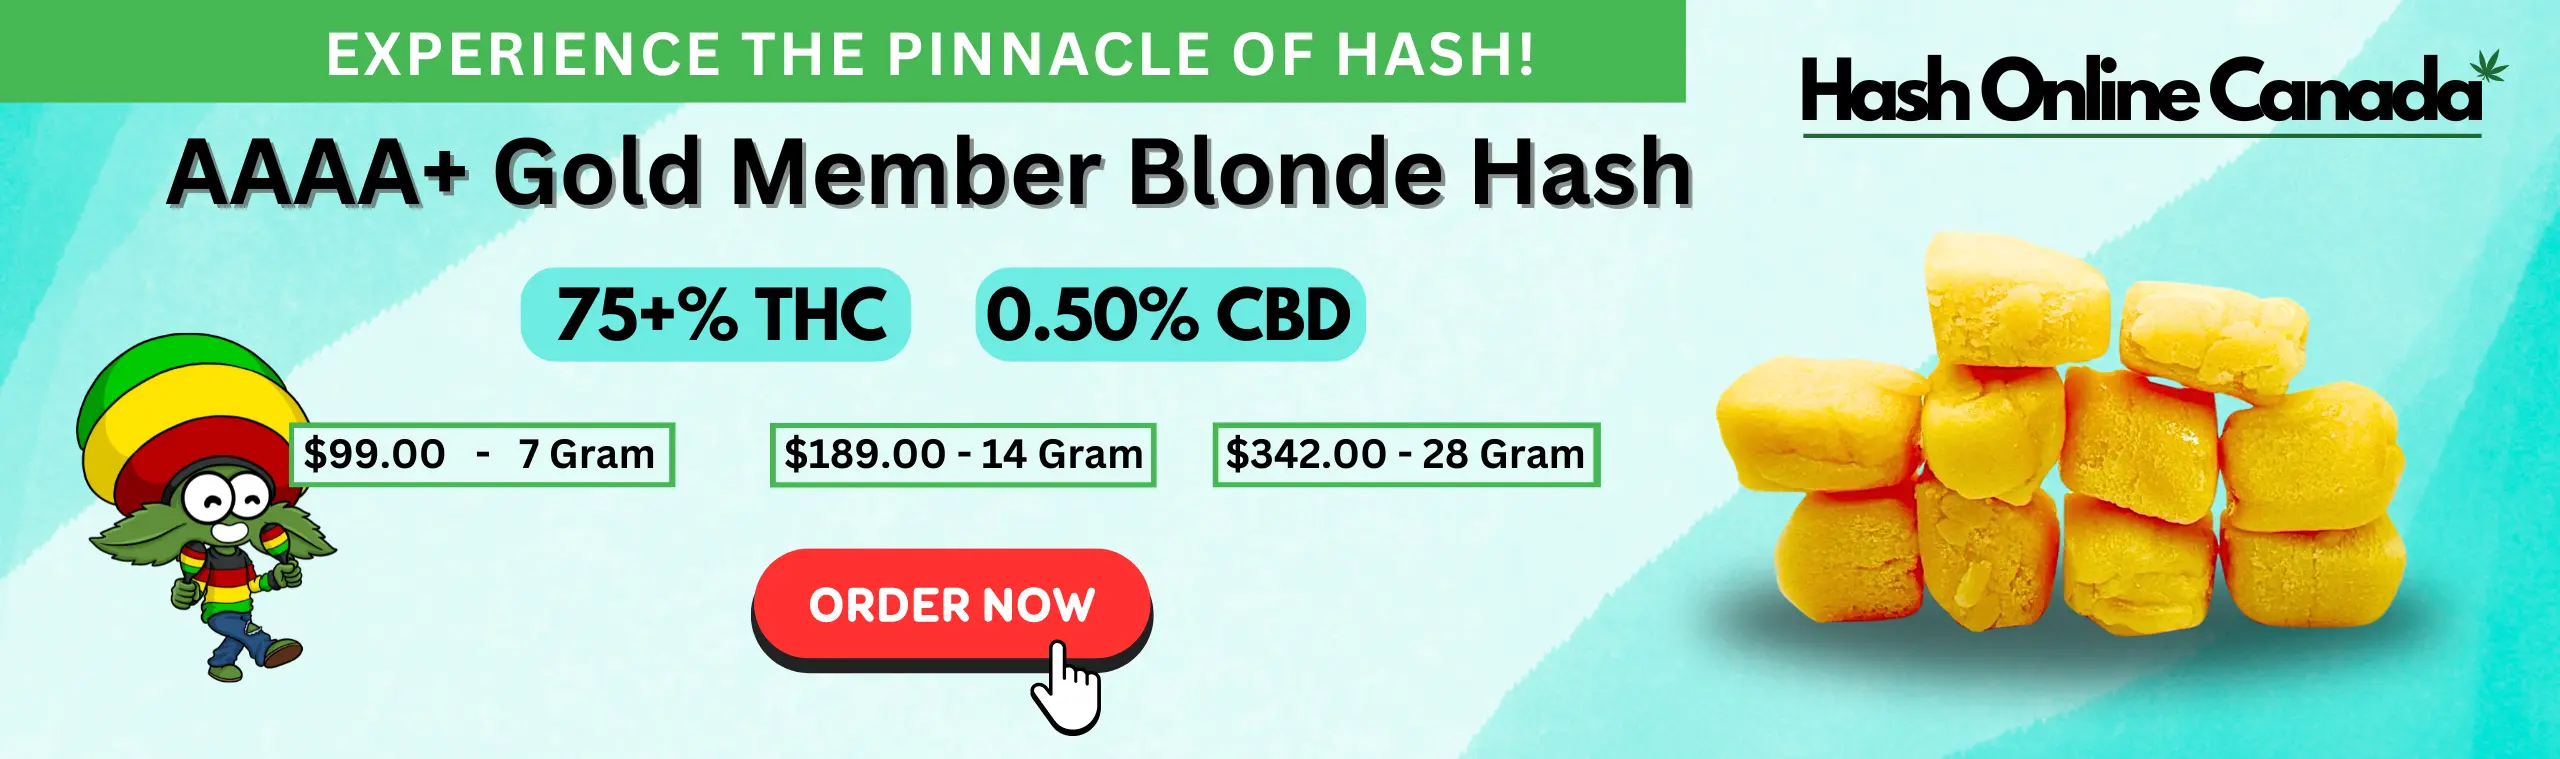 Promotional banner for Hash Online Canada featuring AAAA+ Gold Member Blonde Hash with high THC content.